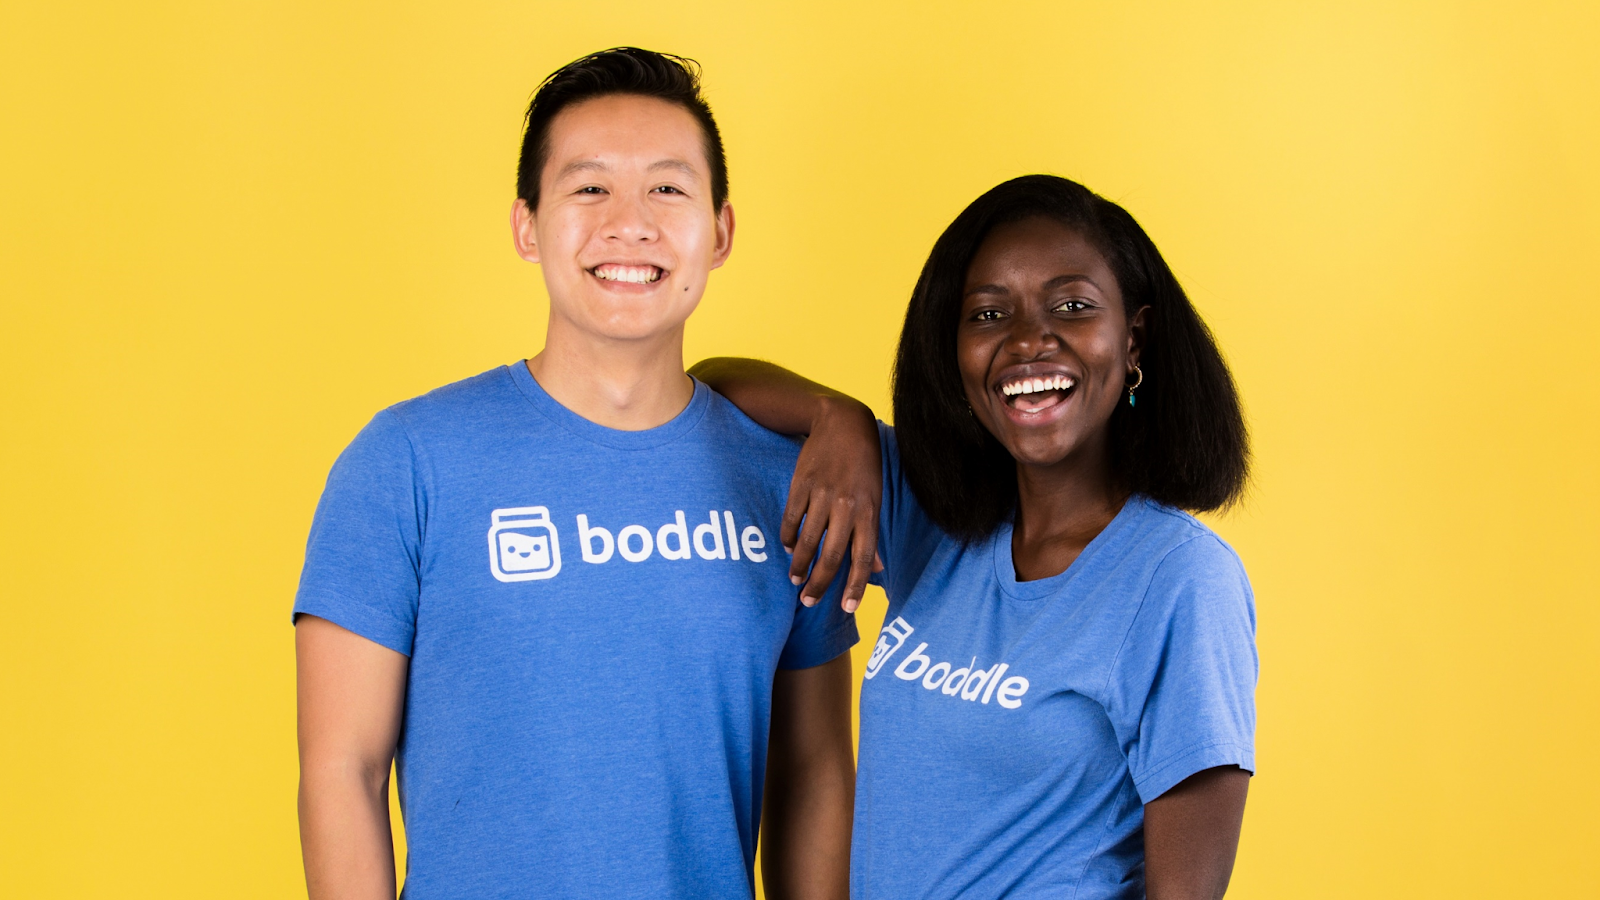 Two people wearing blue Boddle shirts standing in front of a yellow background